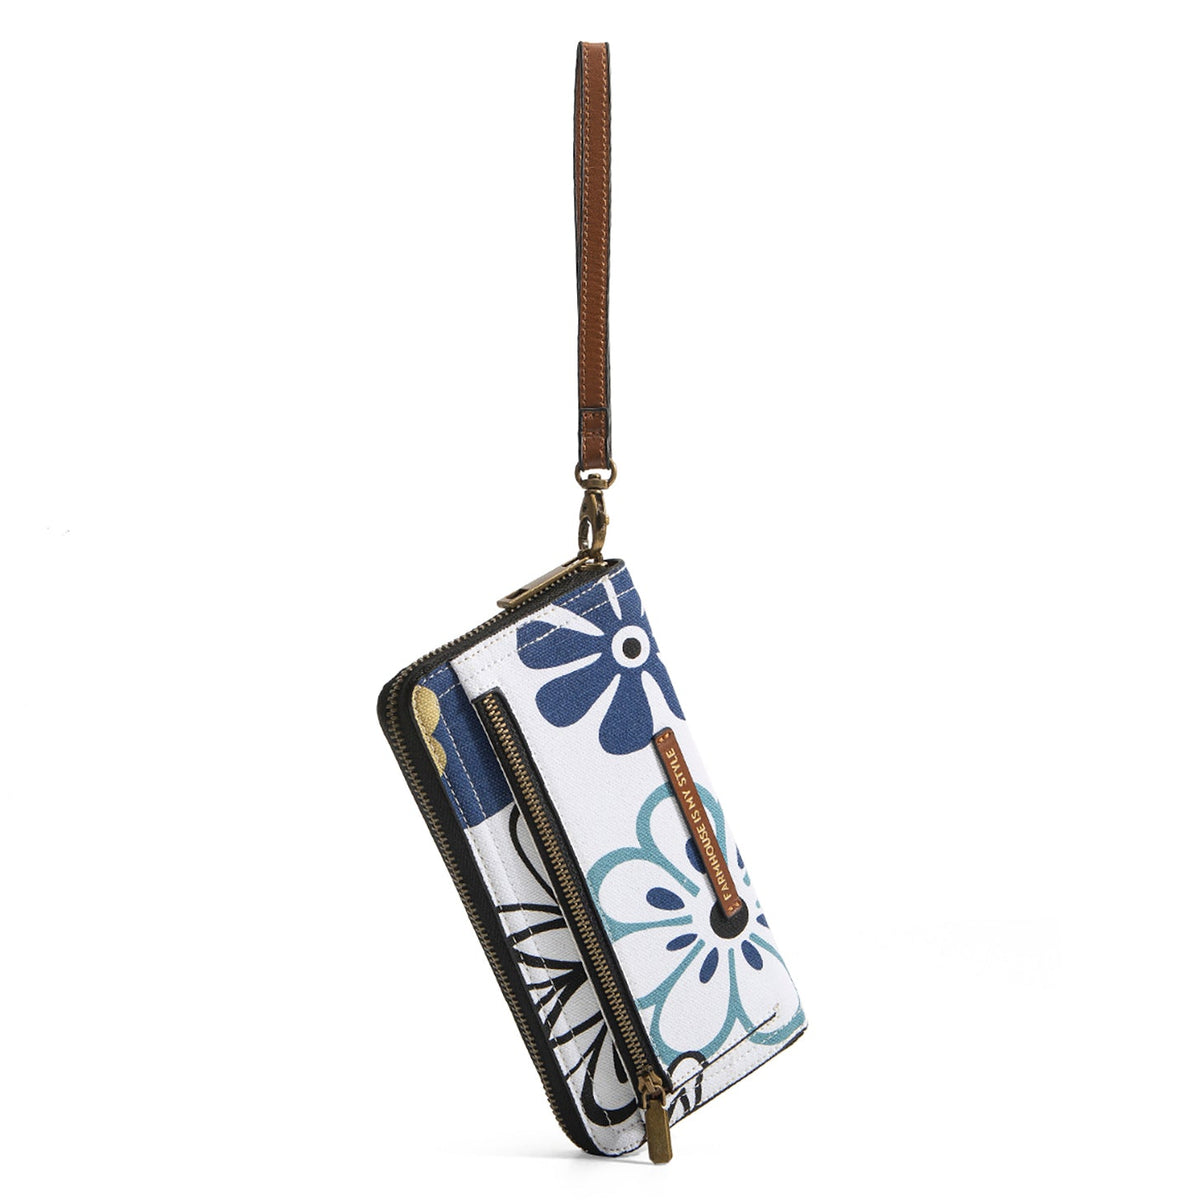 Russet Crossbody Abstract Floral Bundle Discount